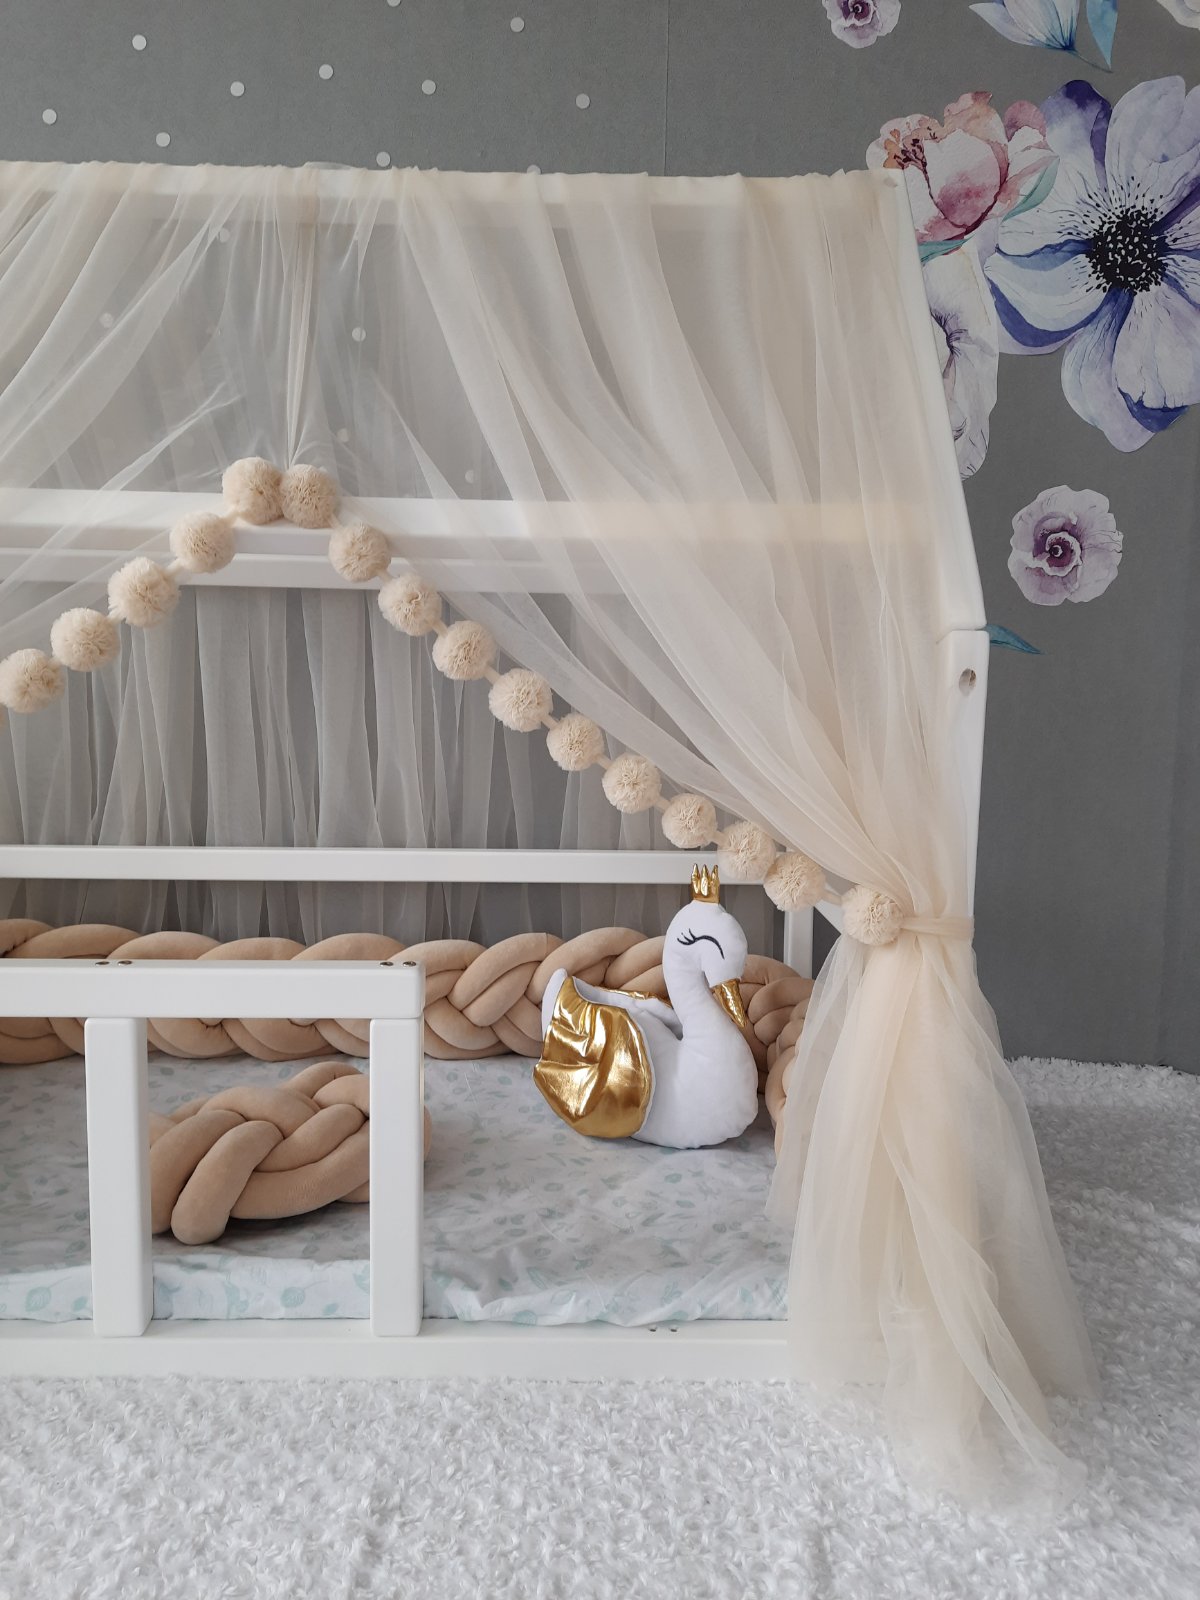 Montessori canopy with pom poms for nursery. Crib tulle canopy + Free swan pillow.